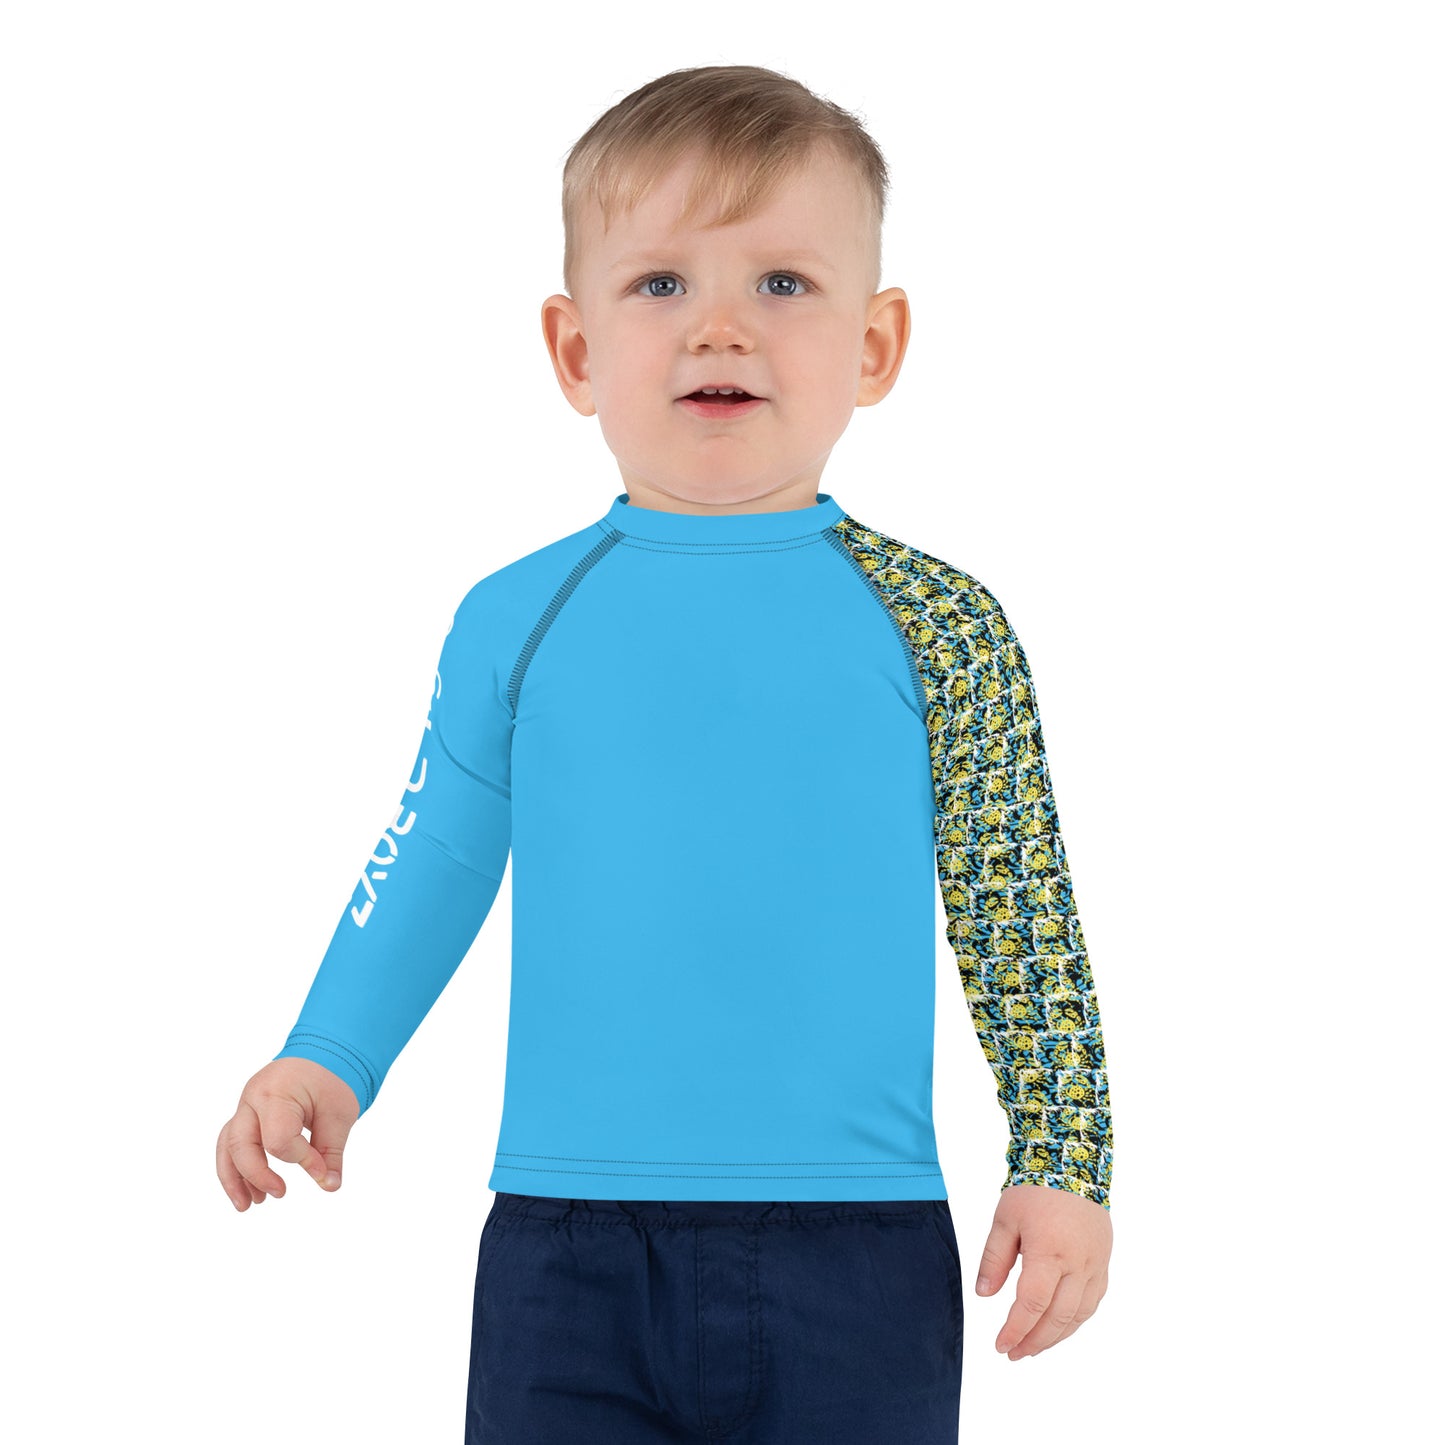 "Happiness Comes in Waves" Kids Boys Surf Rash Guard (Blue)